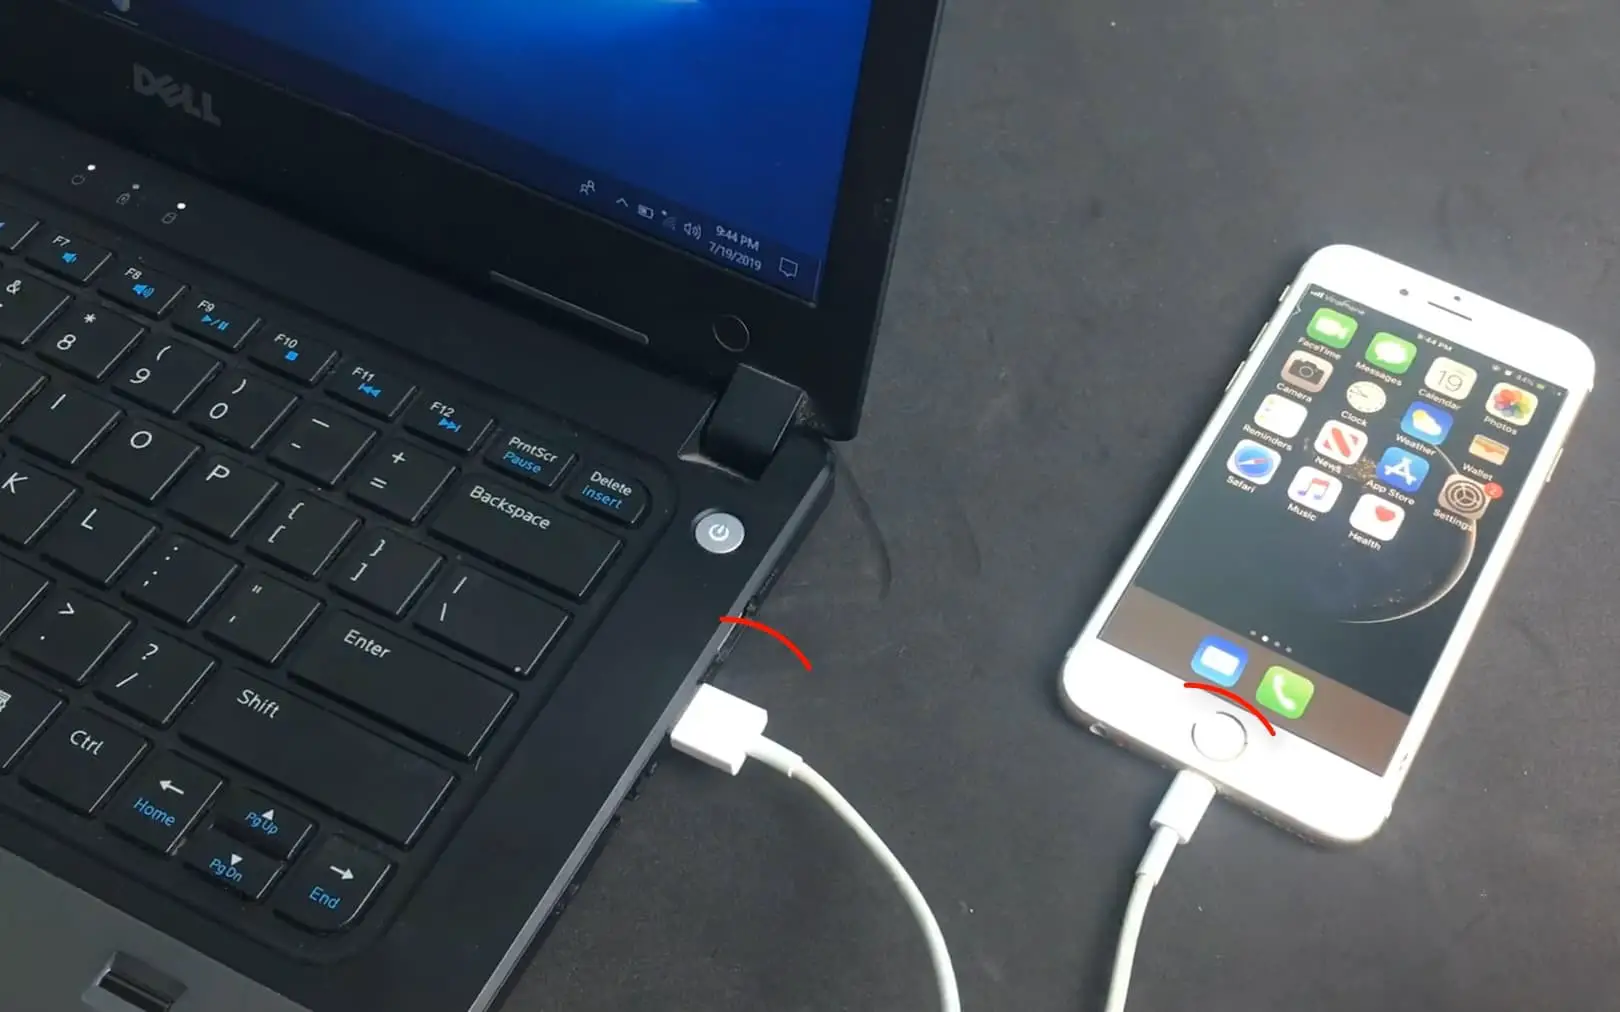 connect USB cable properly